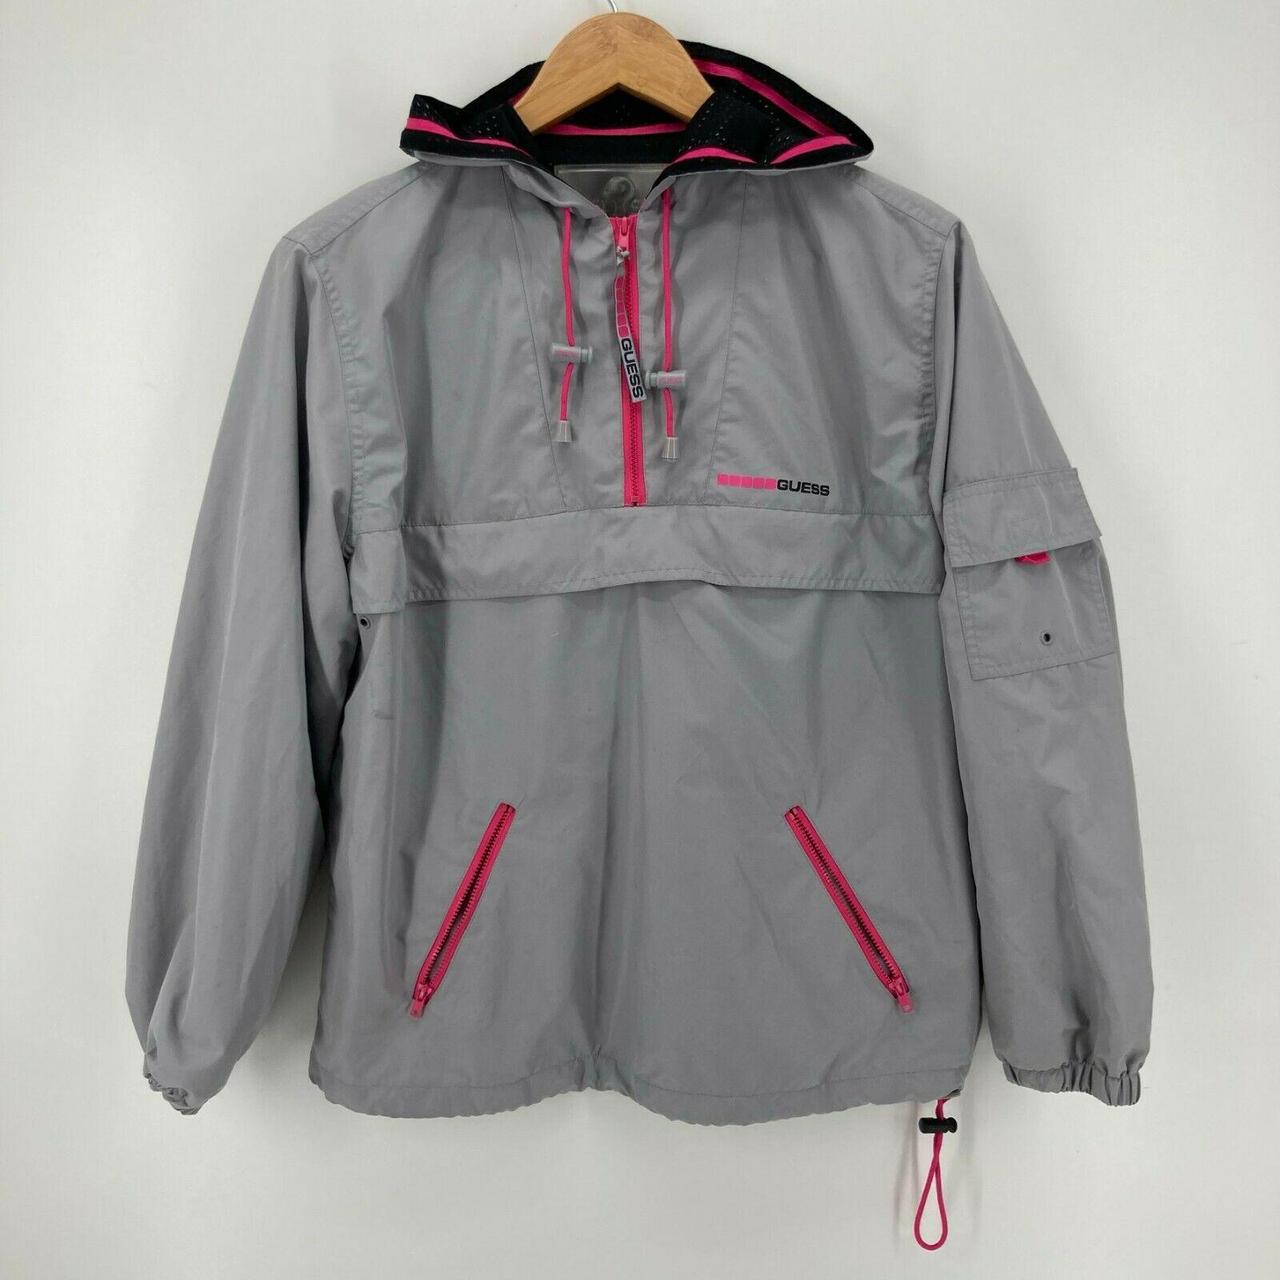 Product Image 1 - Guess Jacket Women's S Gray